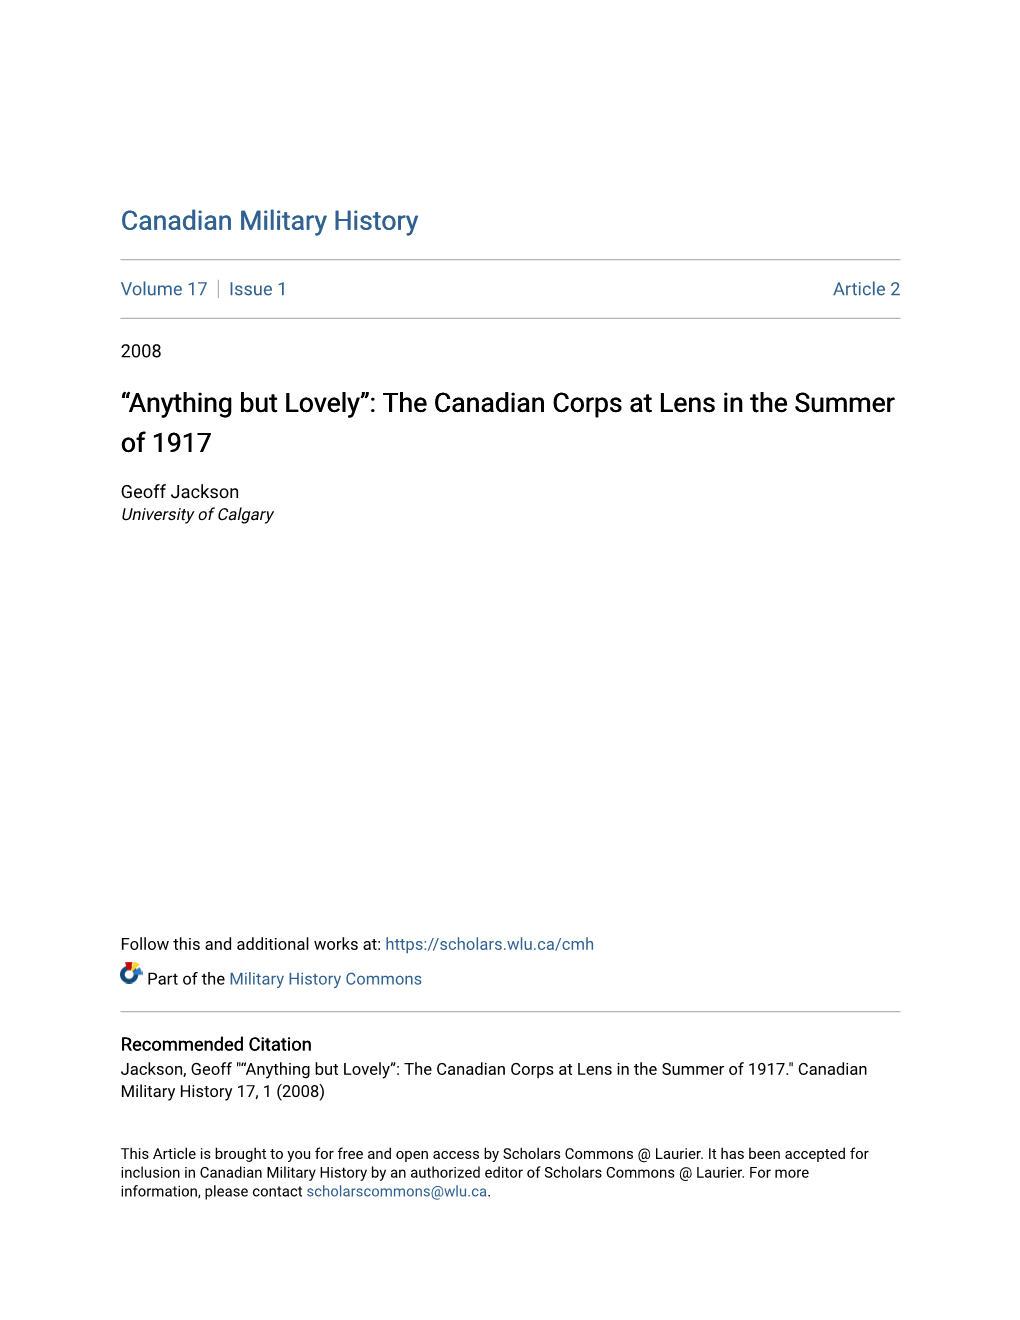 “Anything but Lovely”: the Canadian Corps at Lens in the Summer of 1917